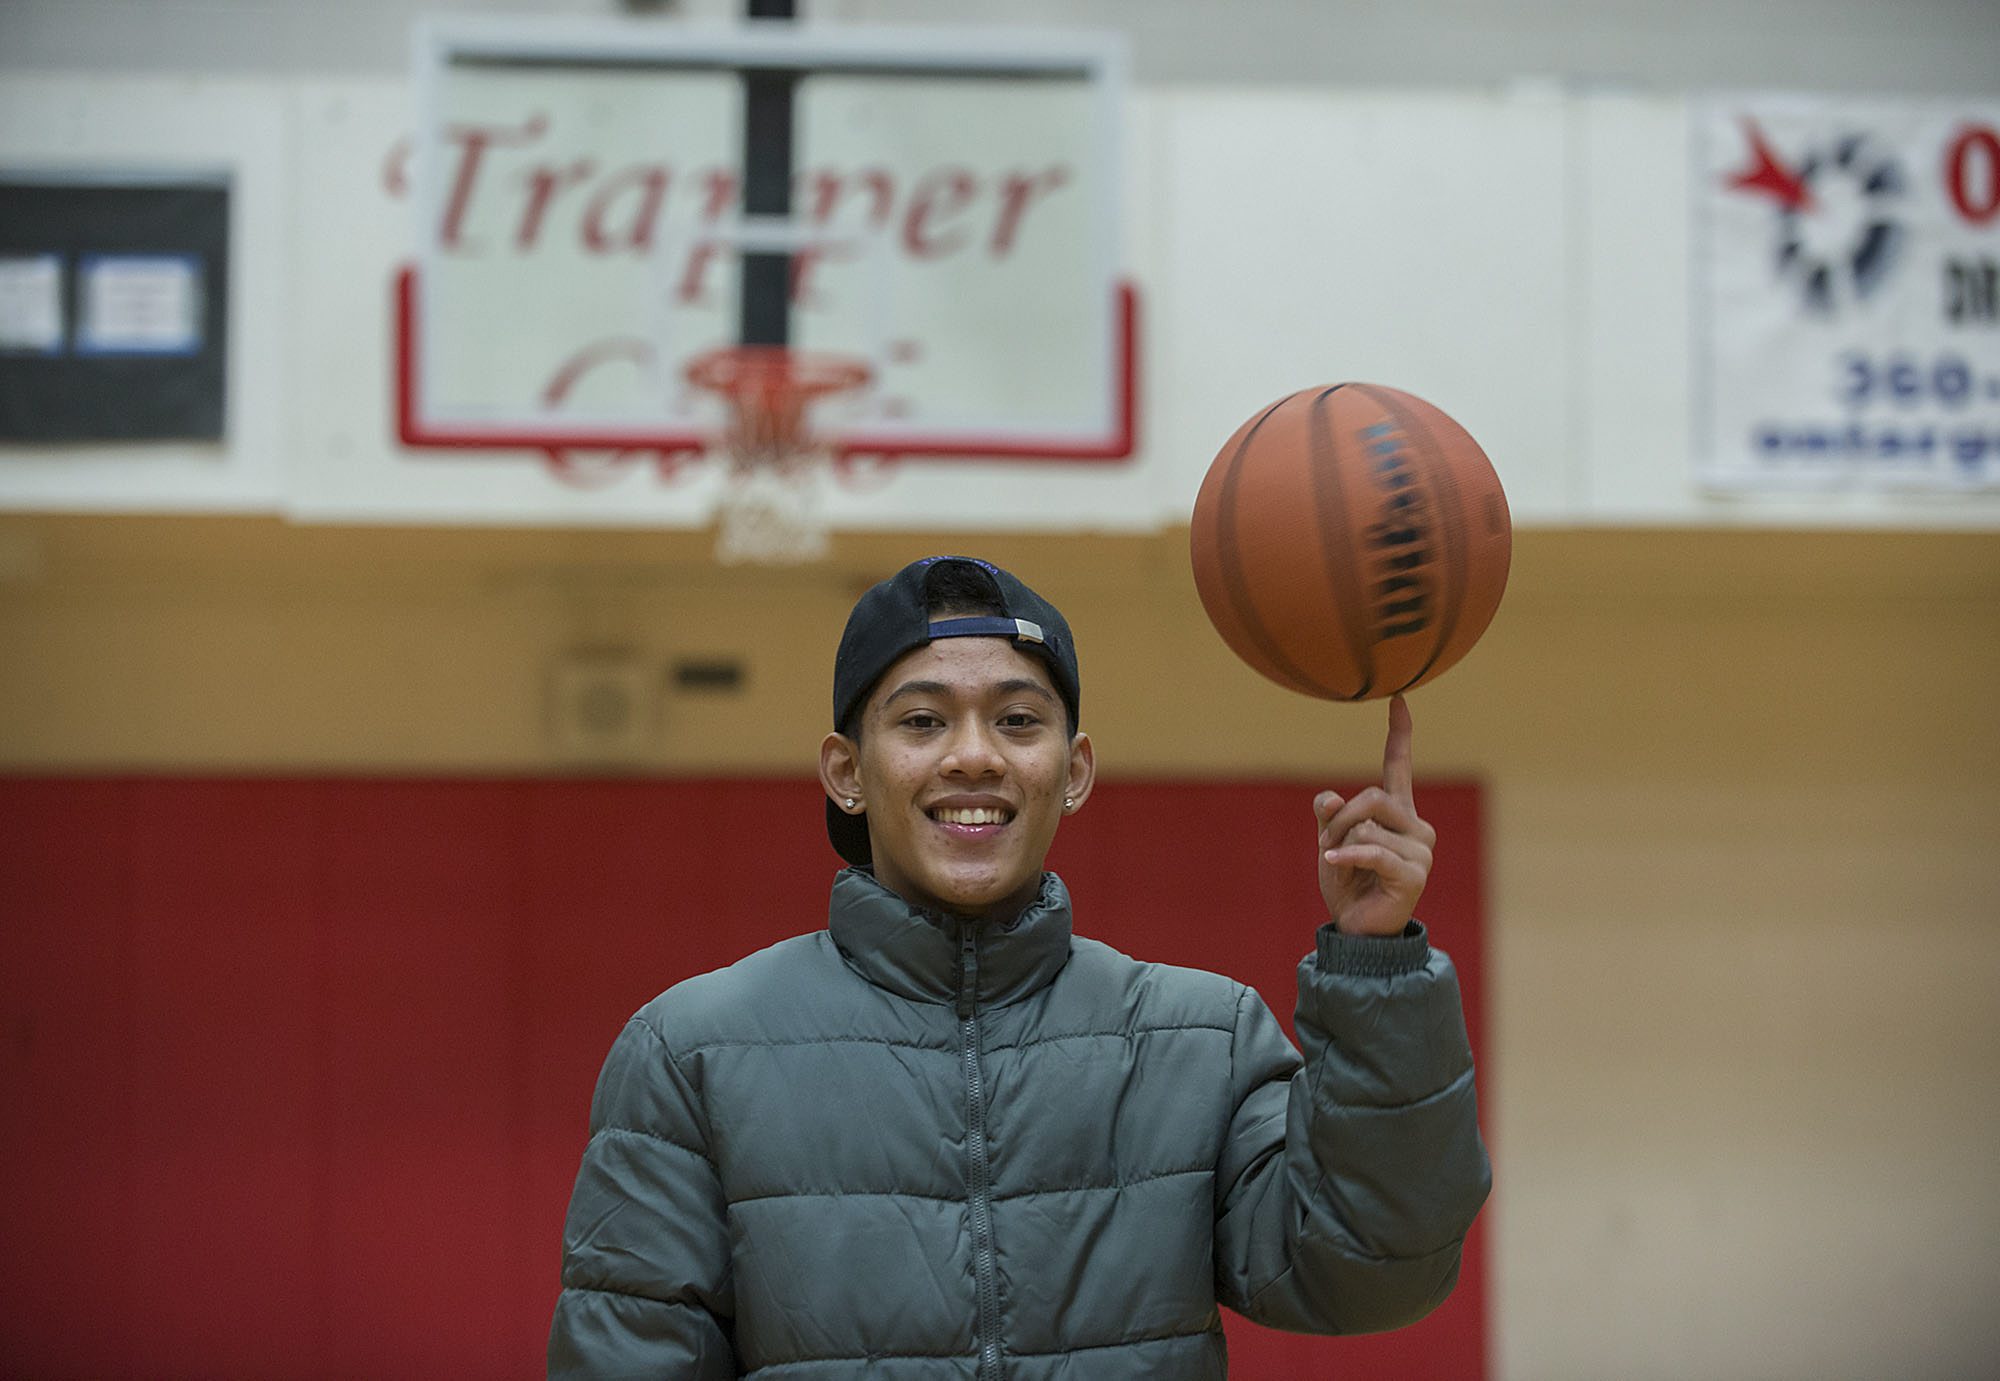 A.J. Yosuo, 17, spins a basketball on his index finger Dec. 17 at Fort Vancouver High School.  A.J. plays varsity basketball for the Trappers. Last year, his family was homeless.